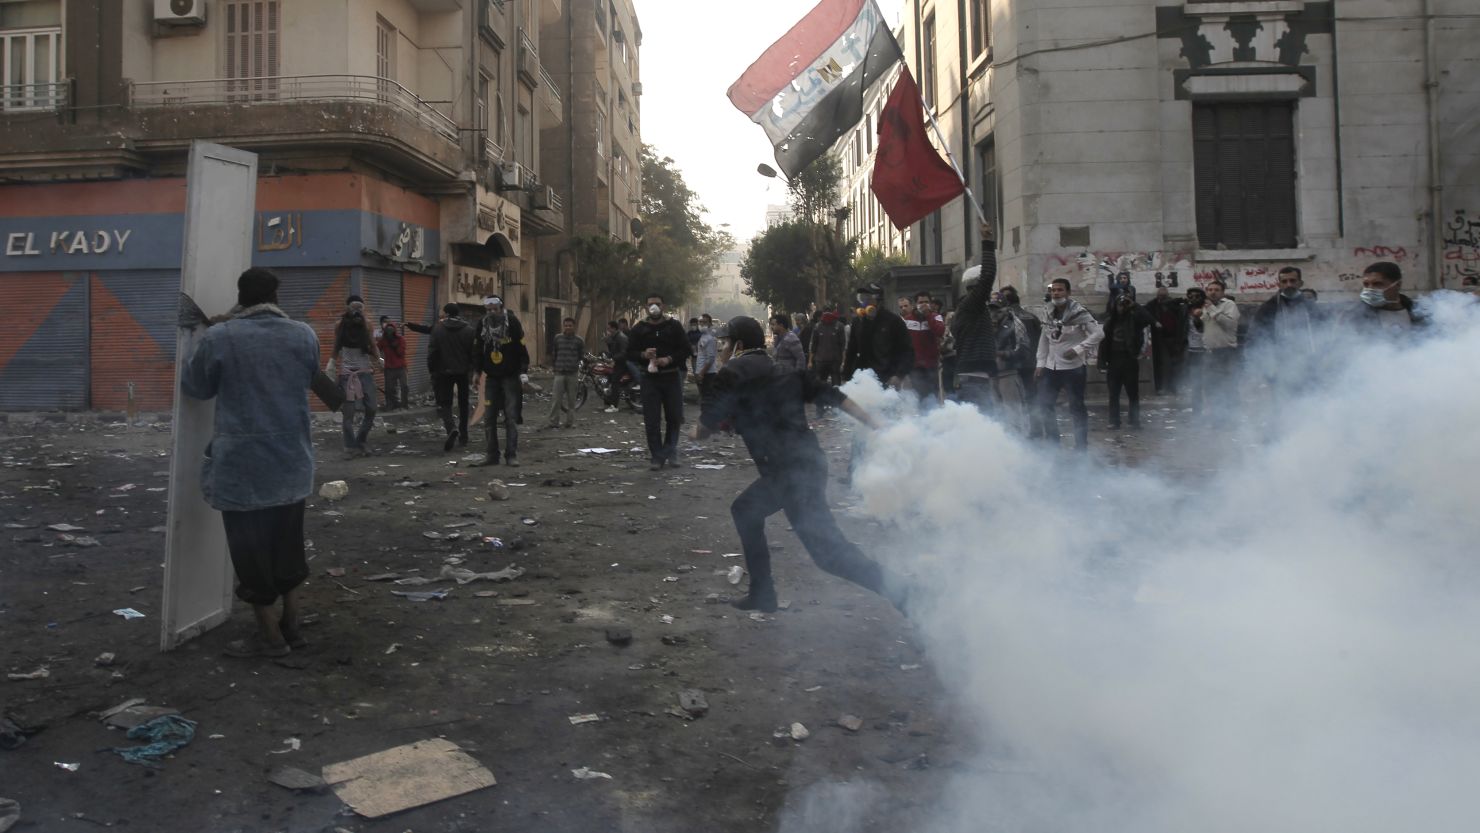 An Egyptian protester runs from tear gas during clashes with riot police in Cairo on November 23.